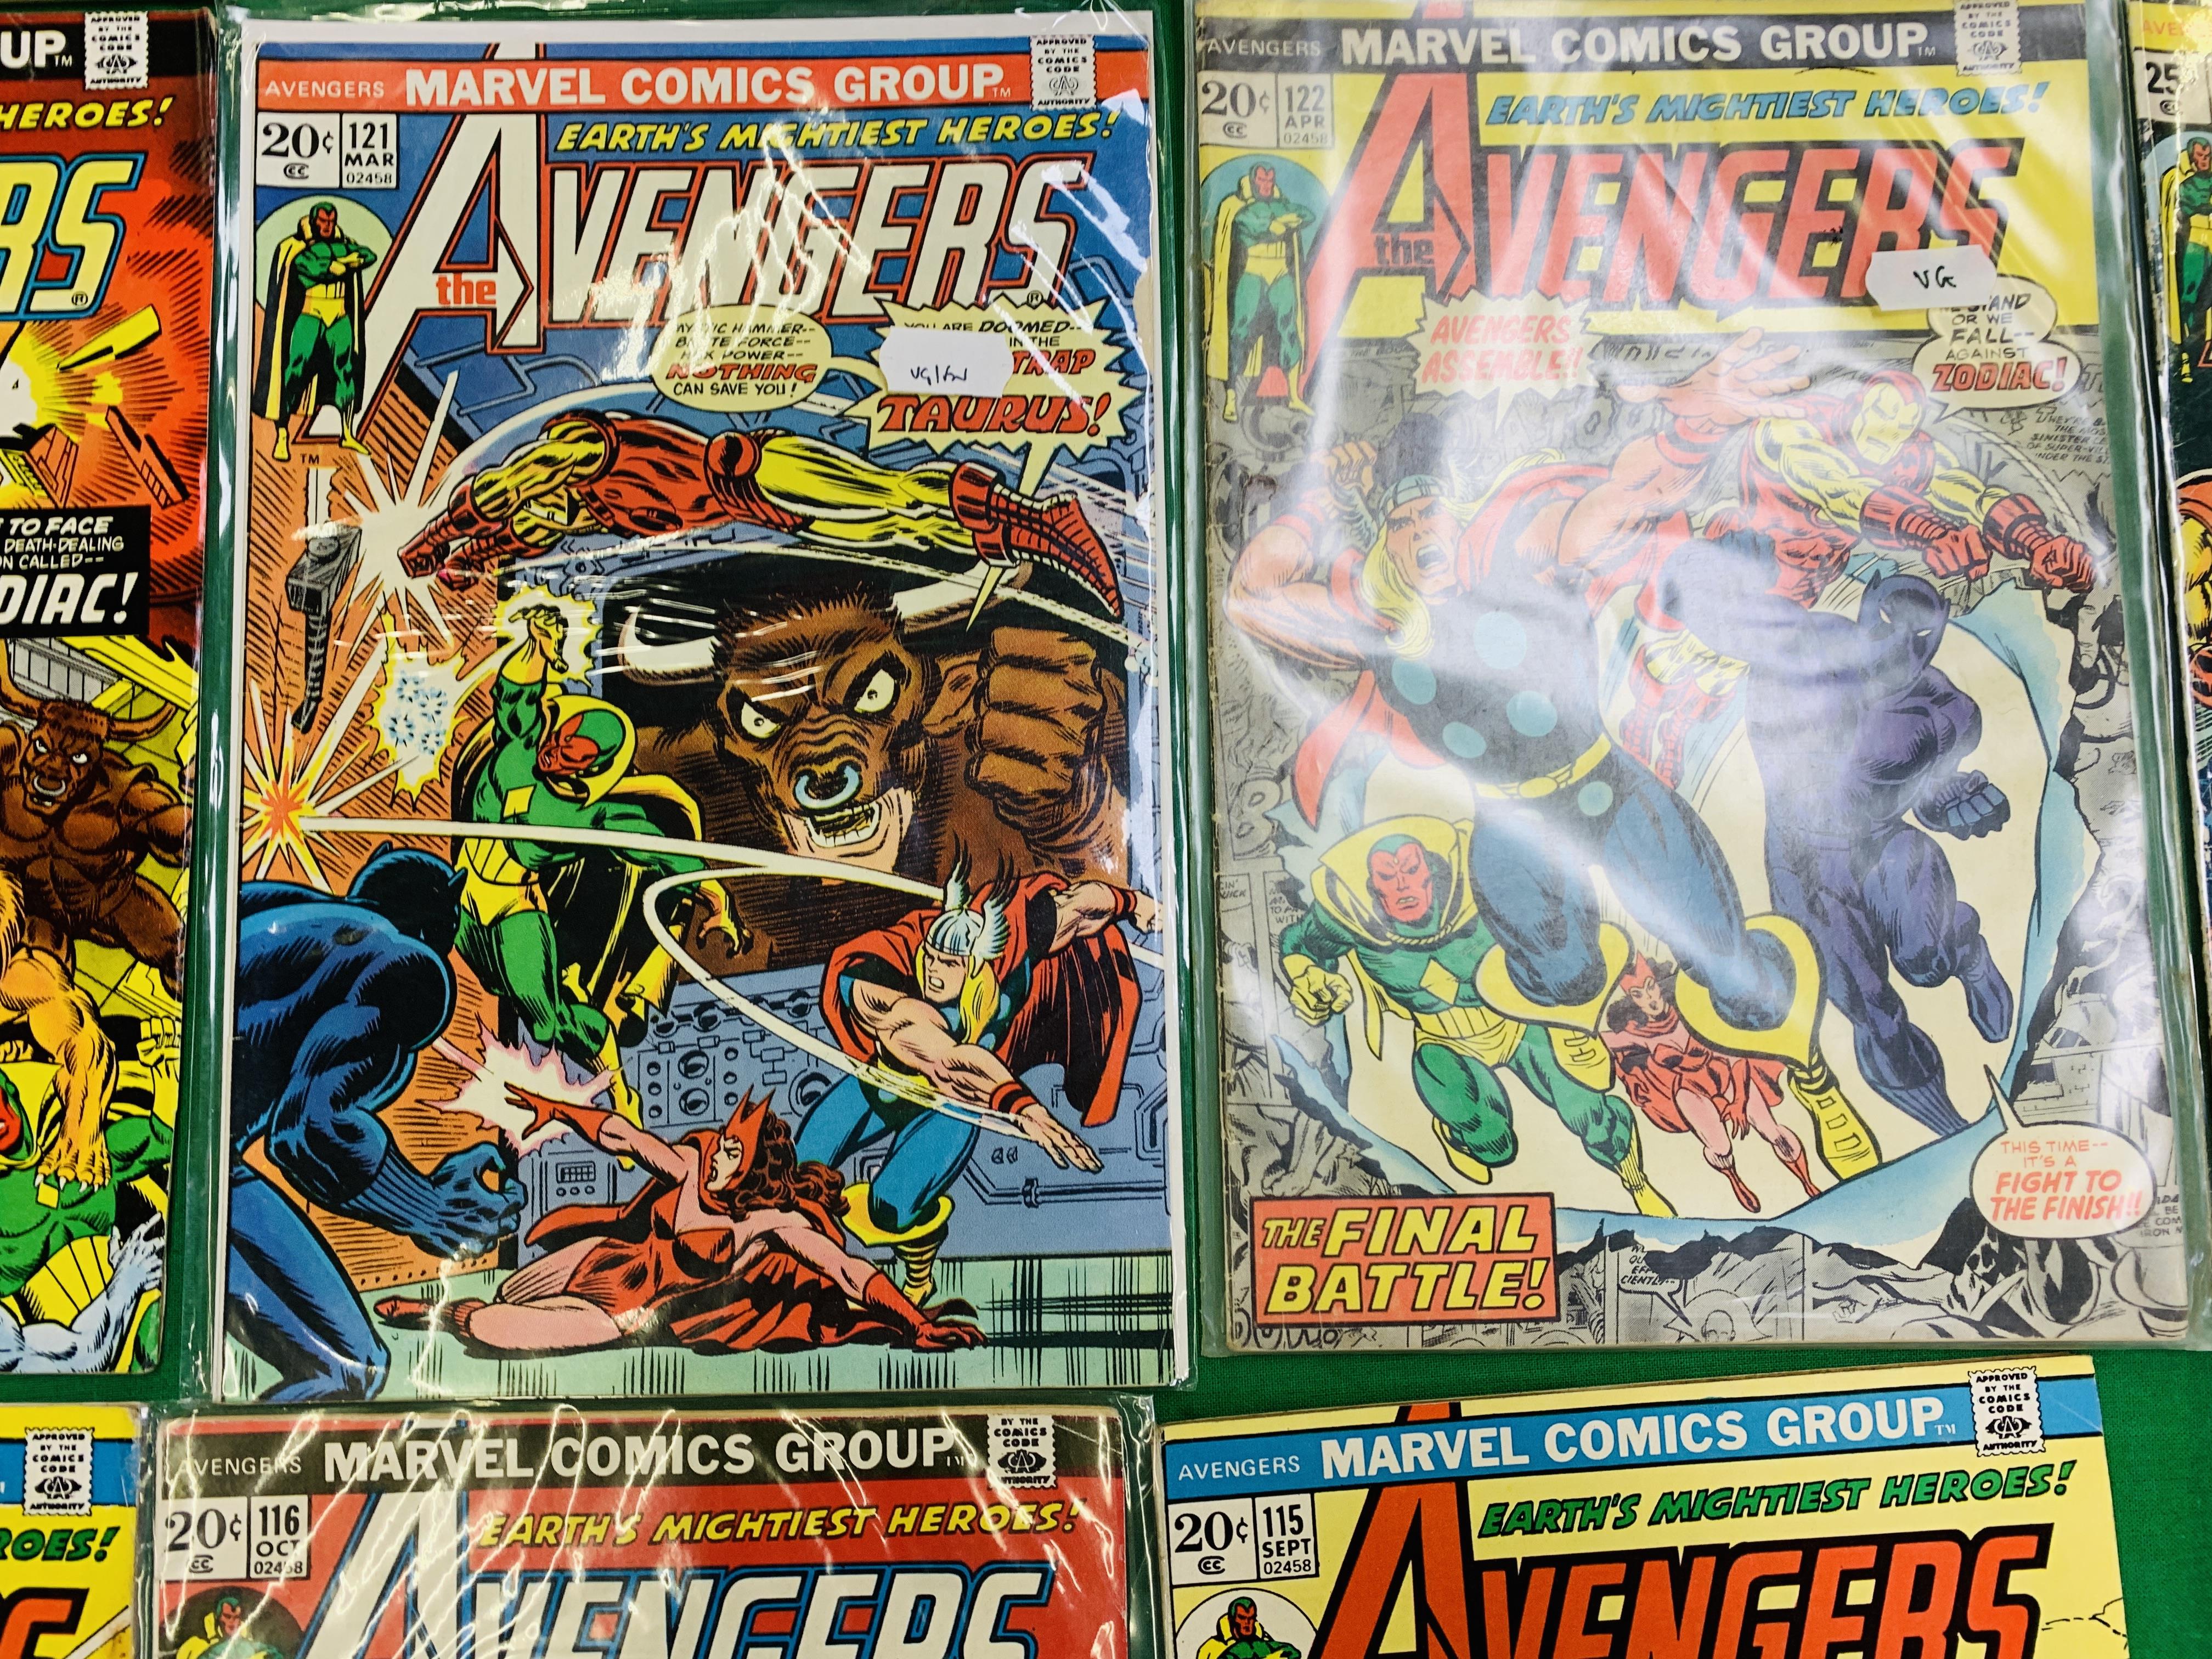 MARVEL COMICS THE AVENGERS NO. 101 - 299, MISSING ISSUES 103 AND 110. - Image 11 of 130